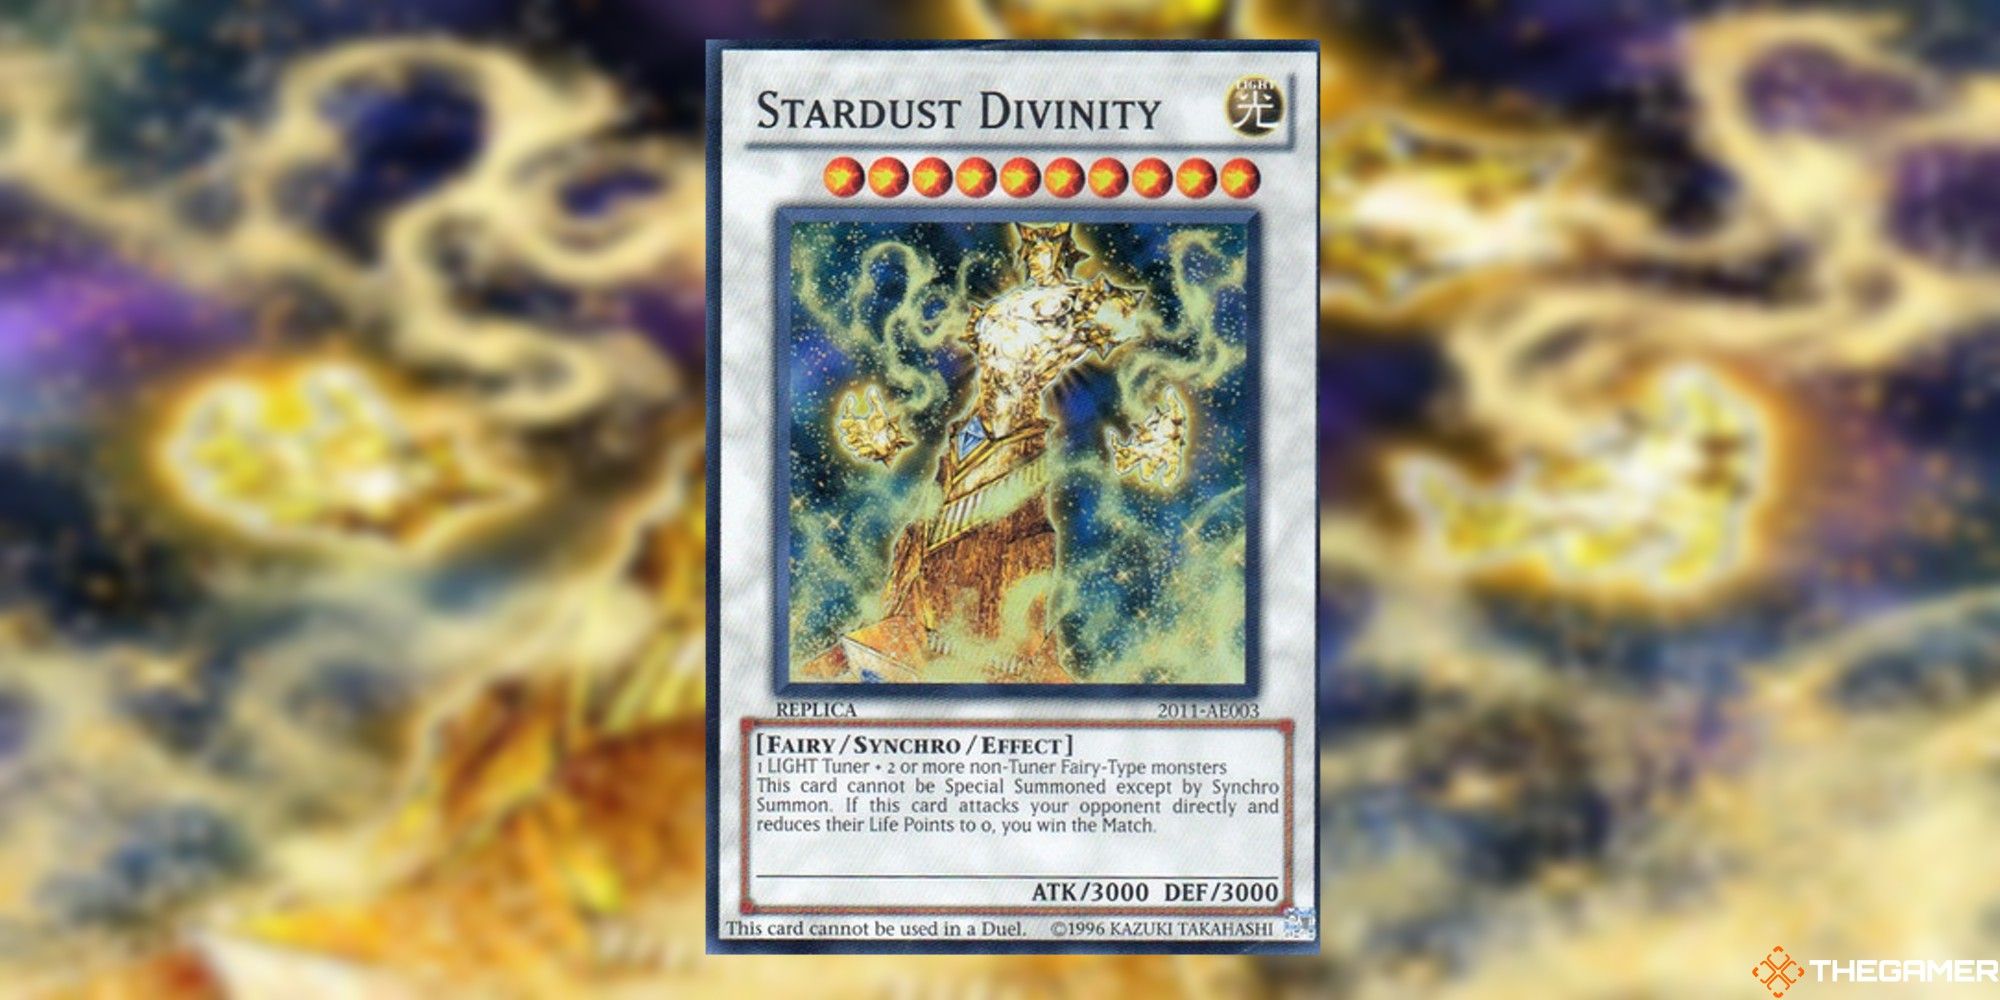 stardust divinity card and art background